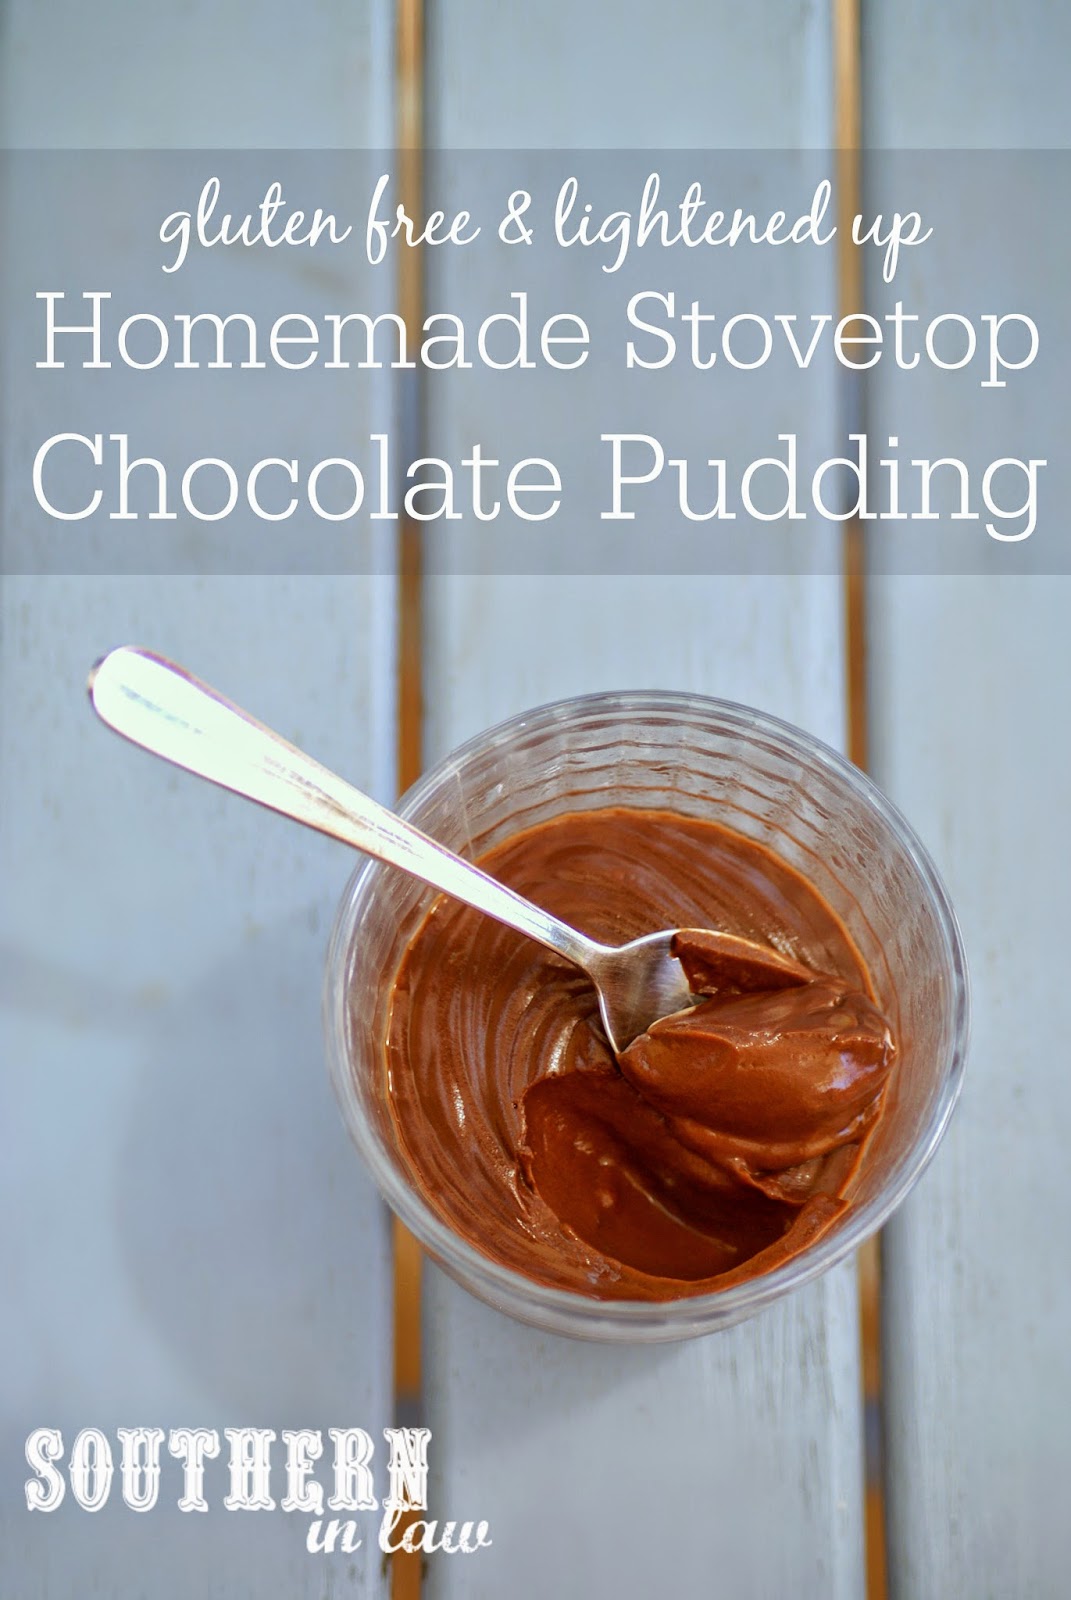 Dairy Free Chocolate Pudding Recipe Made From Scratch - low fat, gluten free, clean eating friendly, refined sugar free 